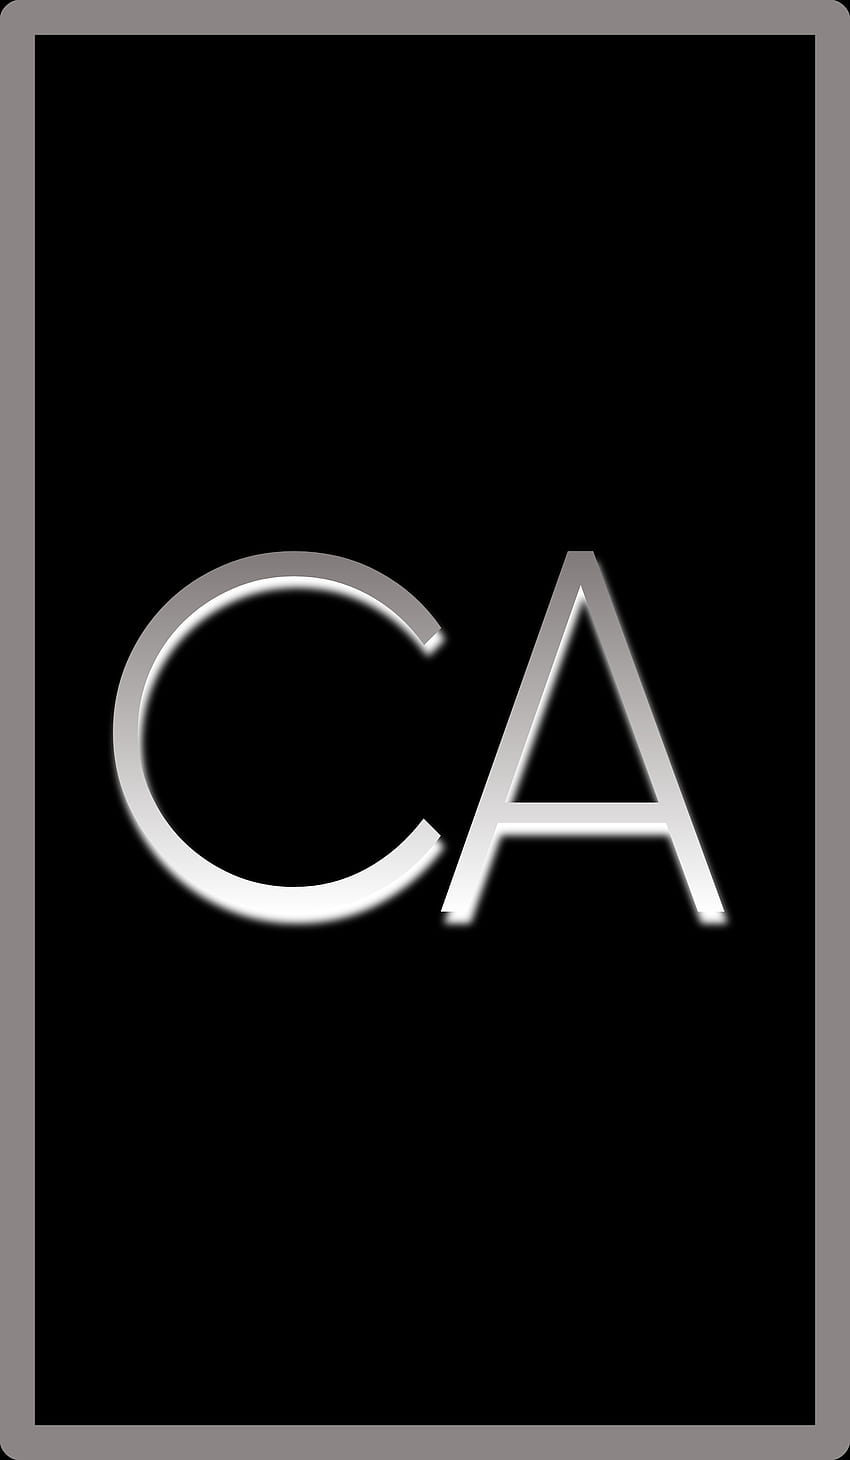 CA logo HD Wallpaper Download For Whatsapp Png Images